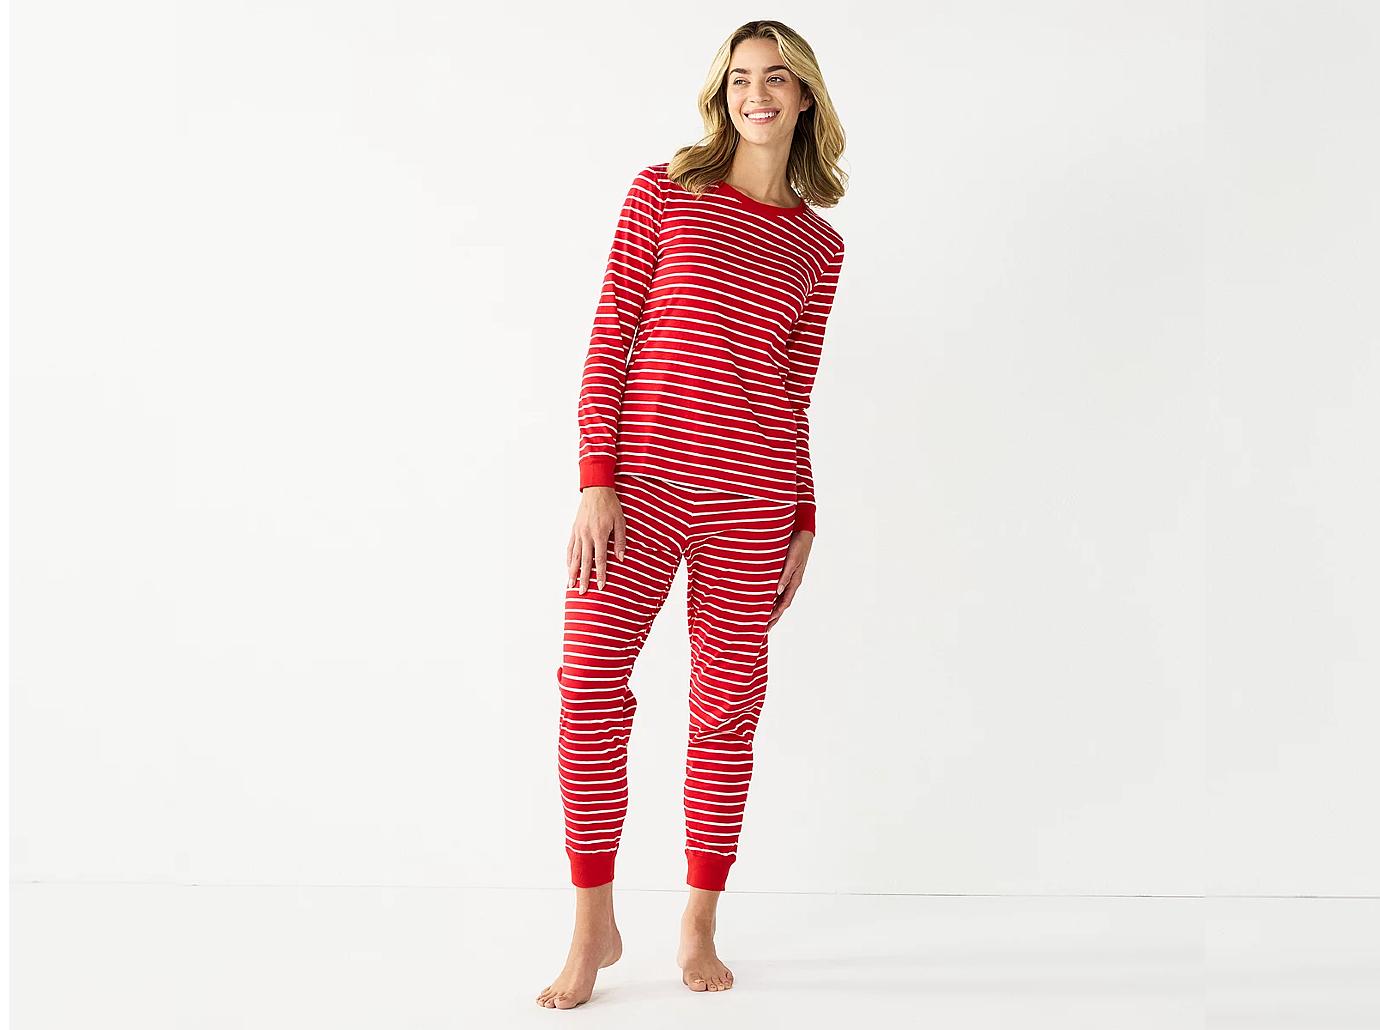 The Best Matching Holiday PJs to Buy Your Family & Friends